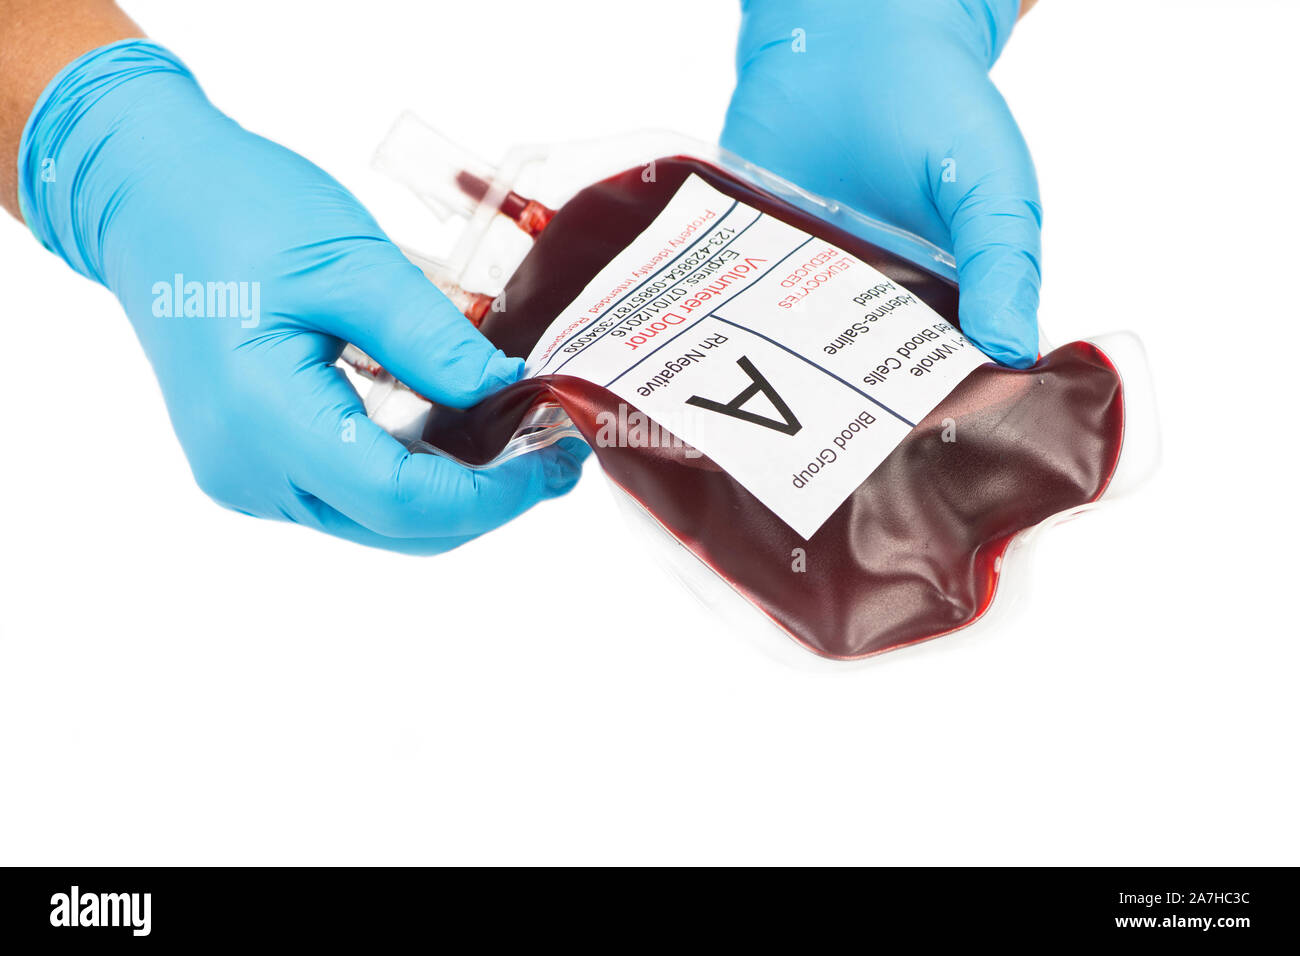 Type A volunteer donated blood unit prepared by gloved hands isolated on white. Stock Photo